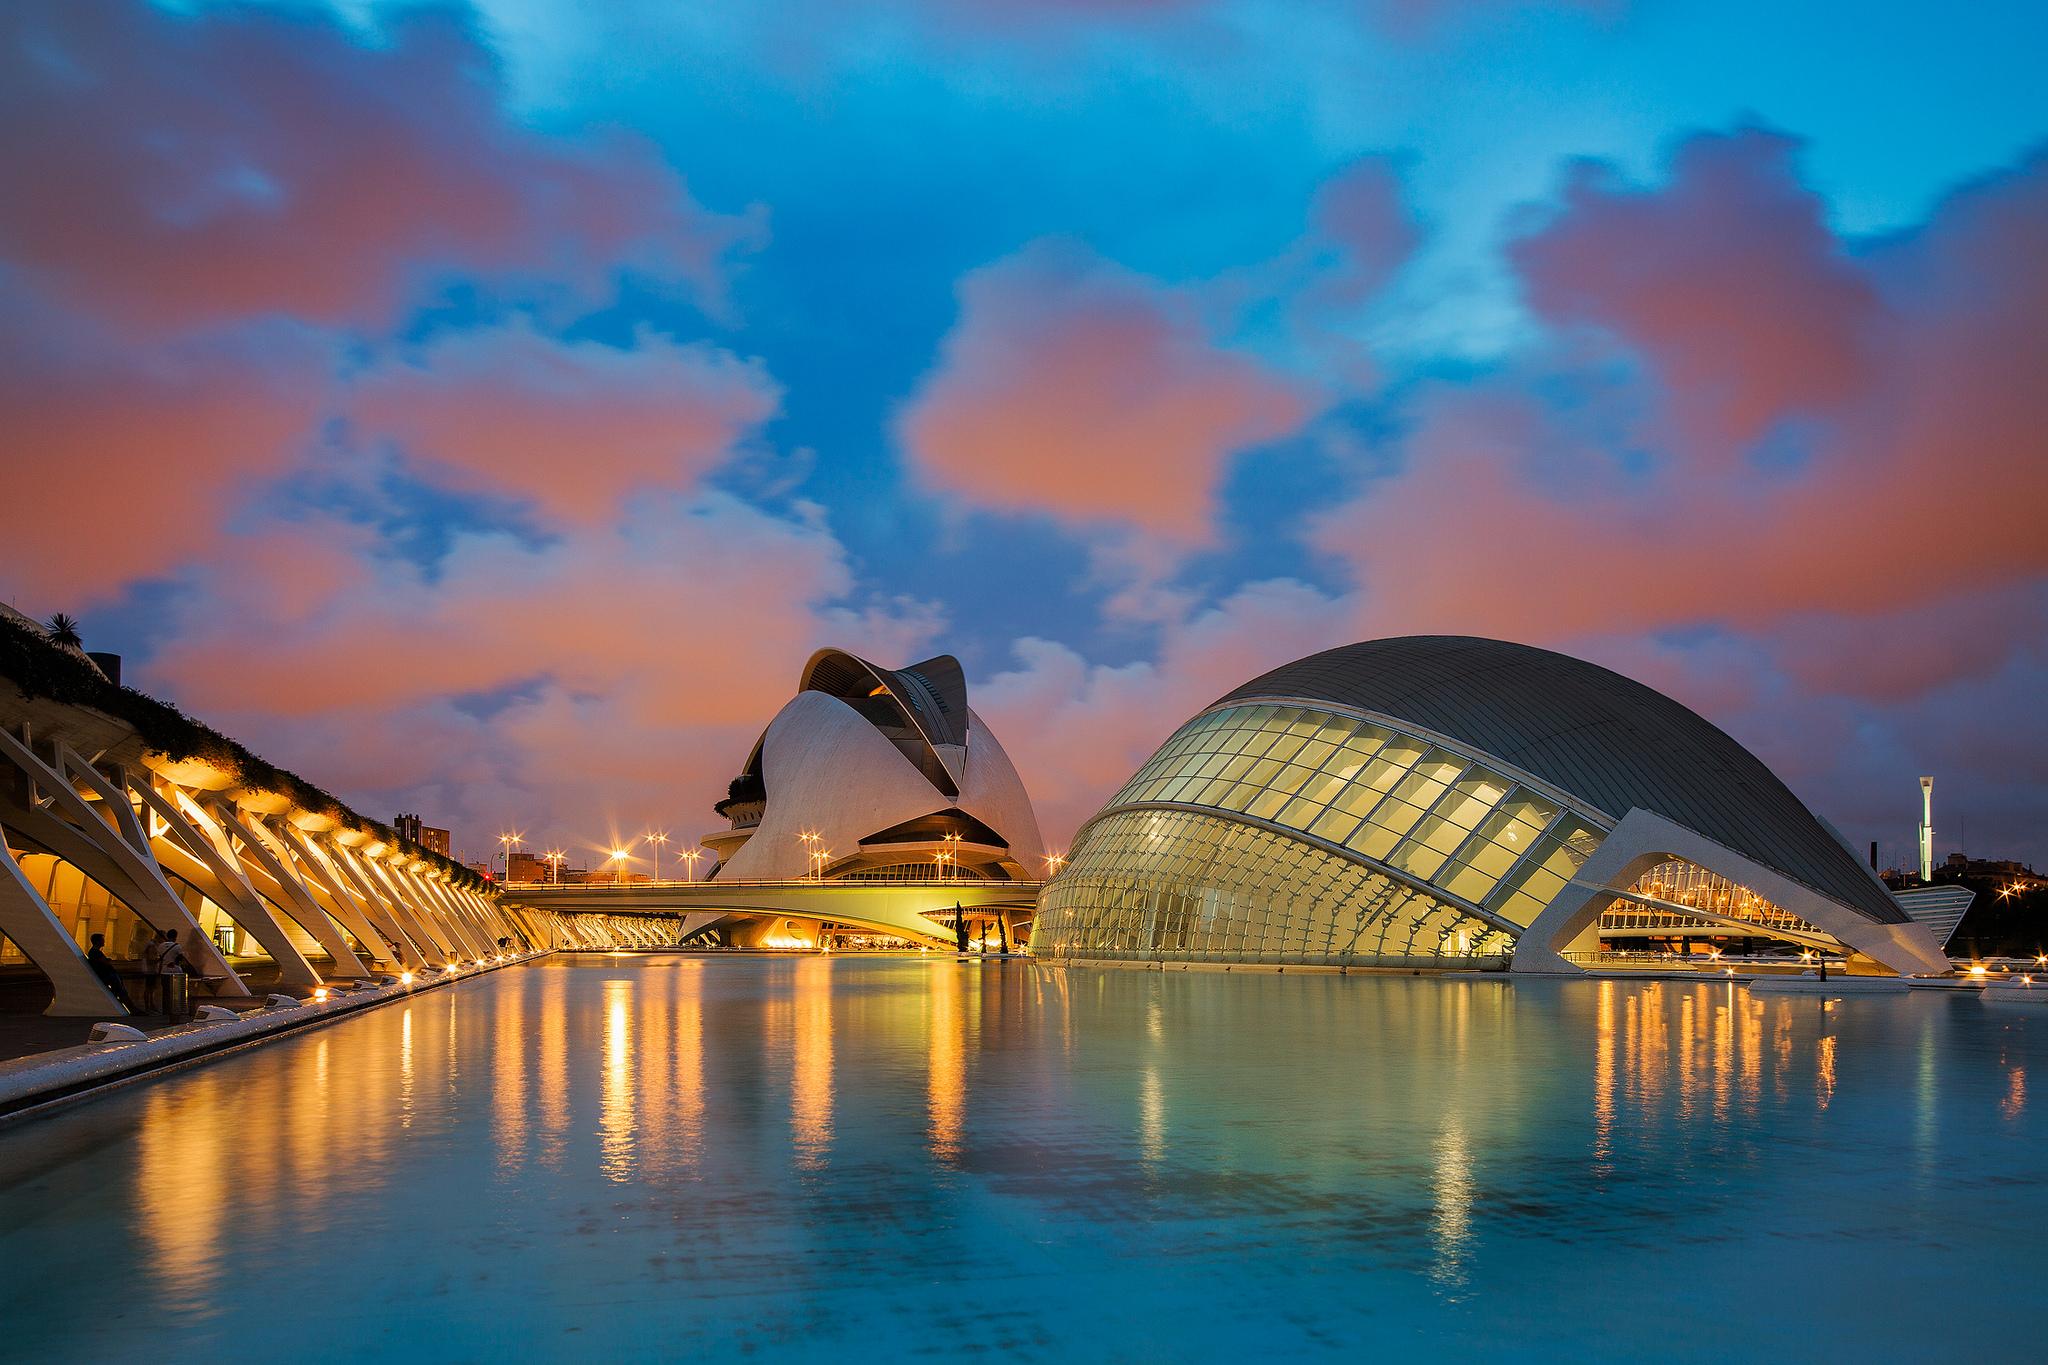 Wallpapers The city of arts and Sciences Valencia Spain on the desktop